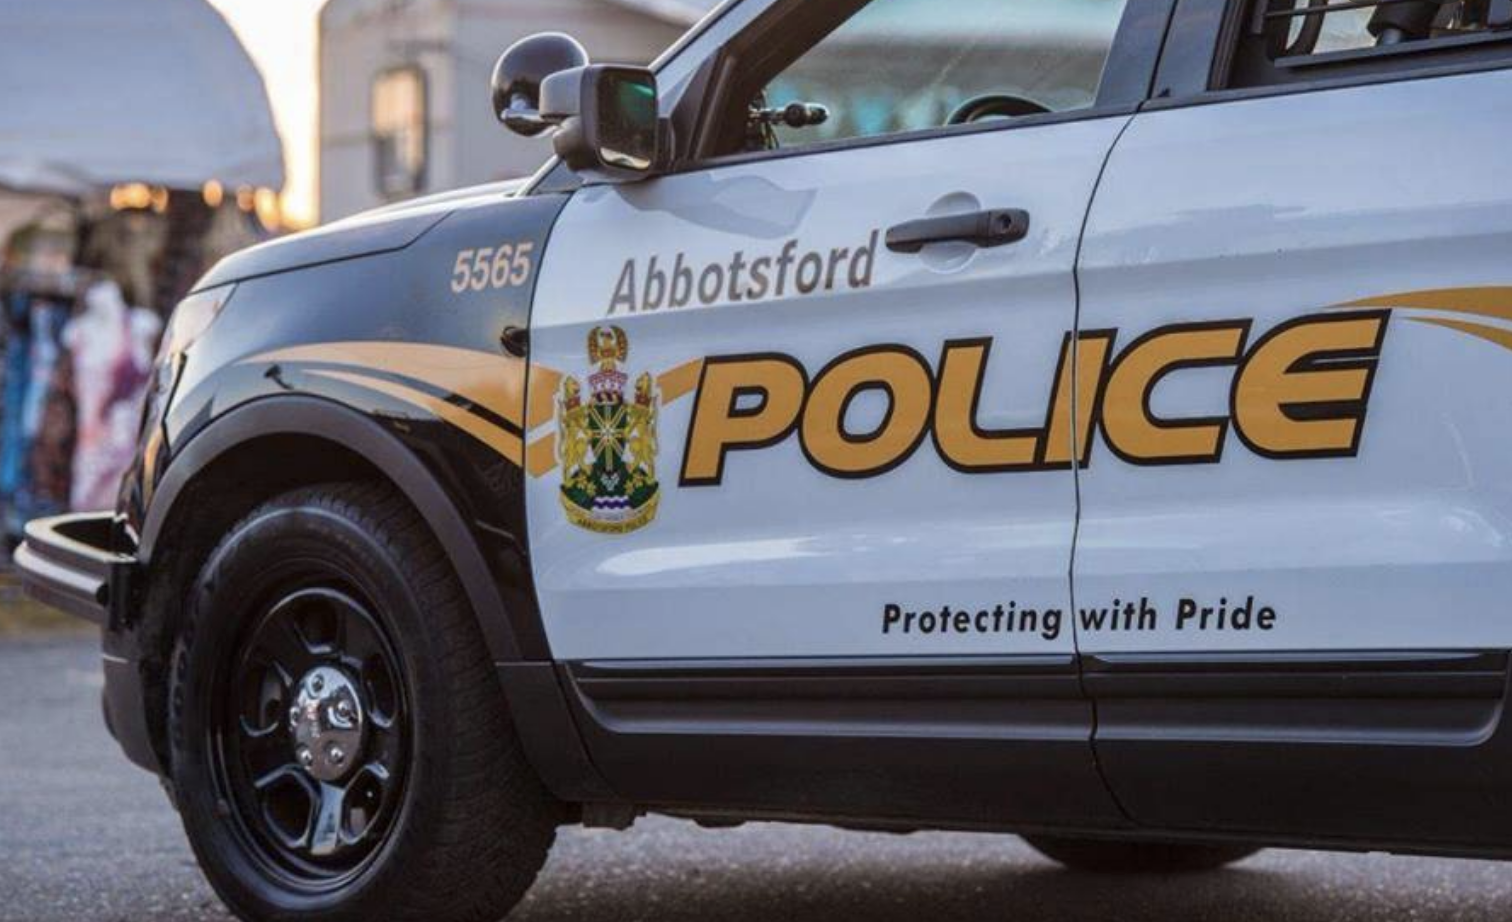 Abbotsford Police Officer Injured responding to a theft incident